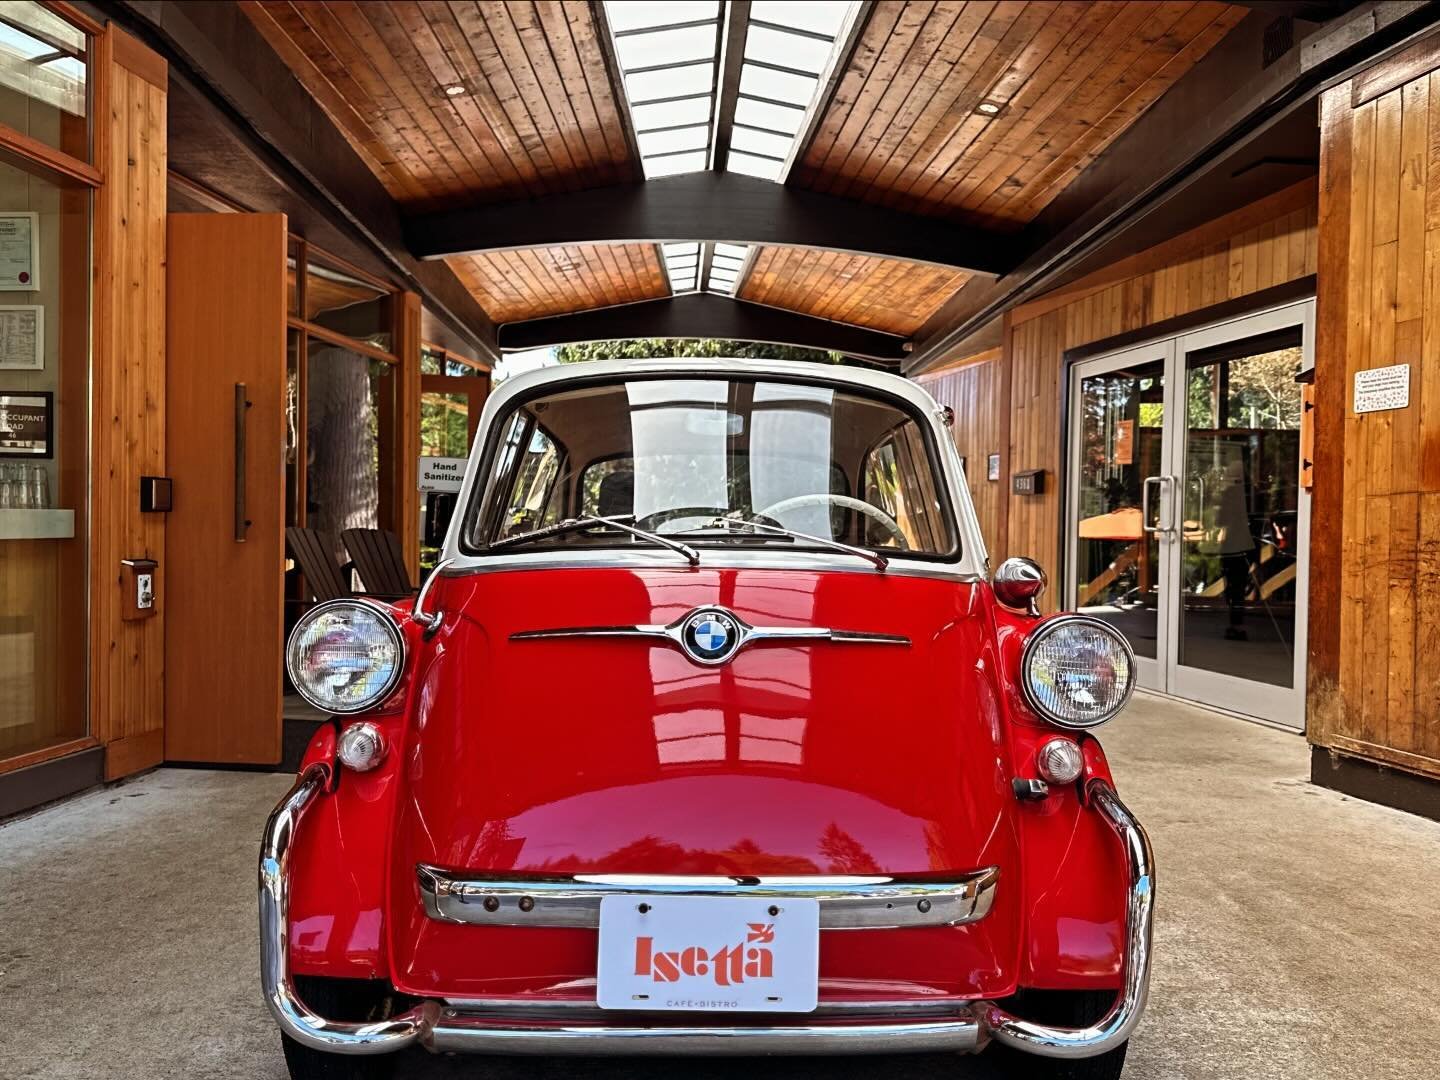 Just finished polishing her up, just before #mothersday &hellip; for all you mothers out there&hellip; all the love! ❤️ #isetta